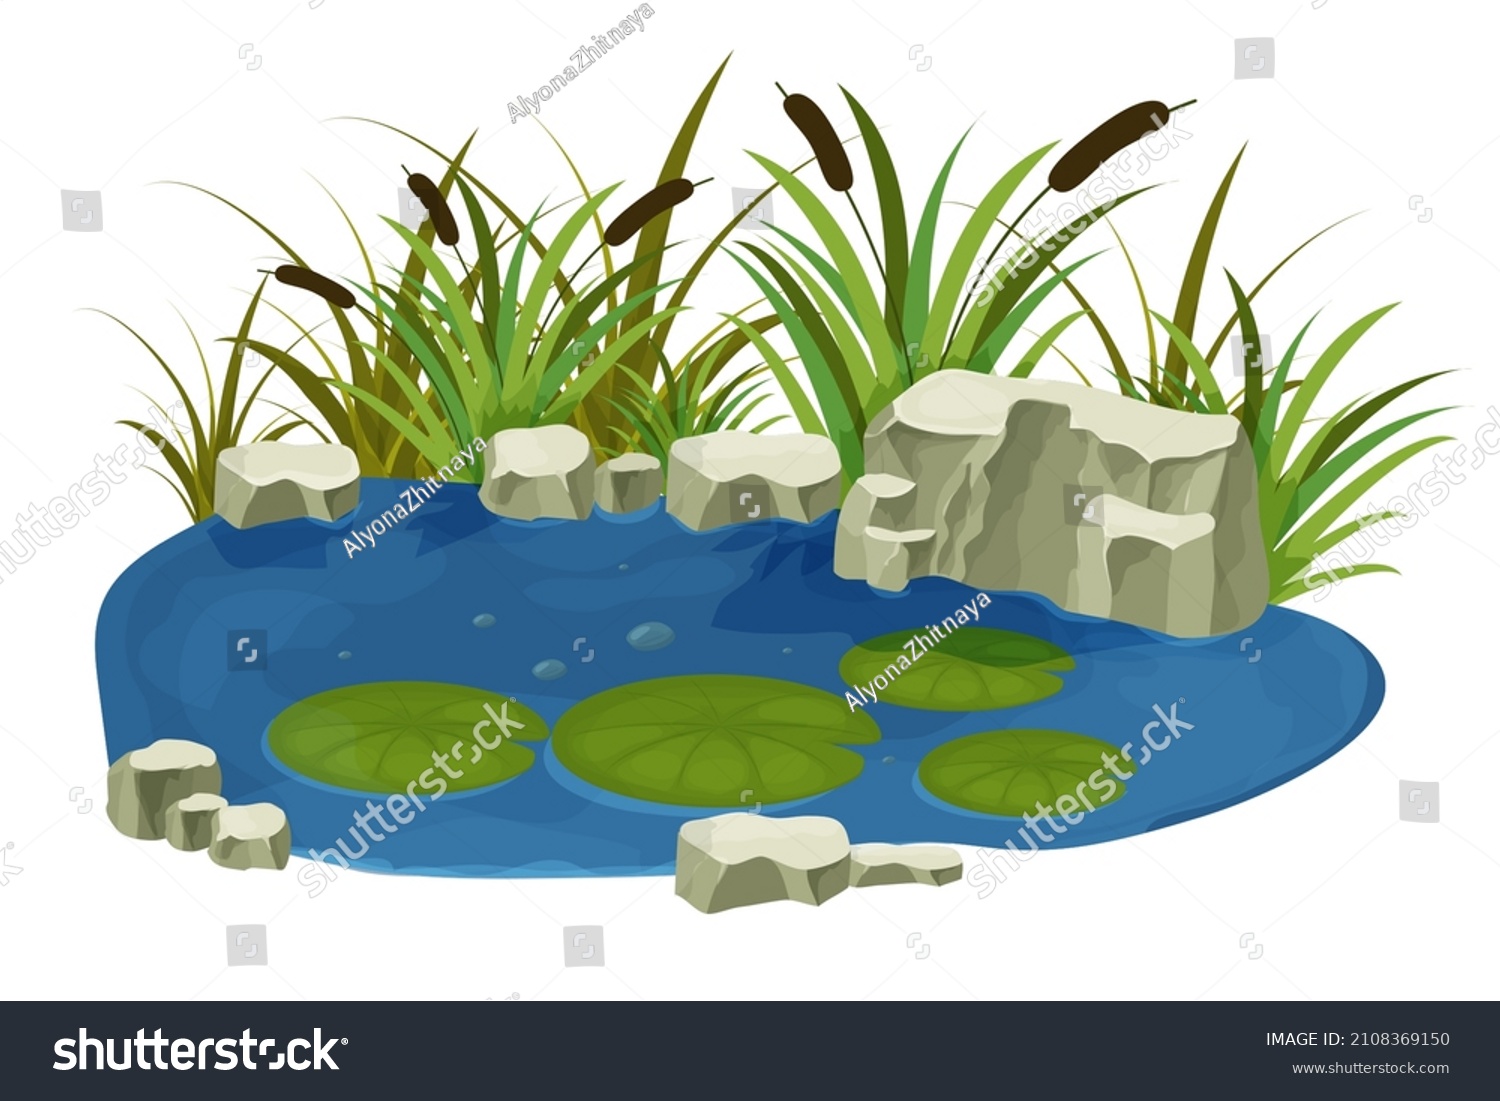 SVG of Lake, swamp with stones, bulrush lily leaves in cartoon style isolated on white background. Forest fantasy scene, wild nature. svg